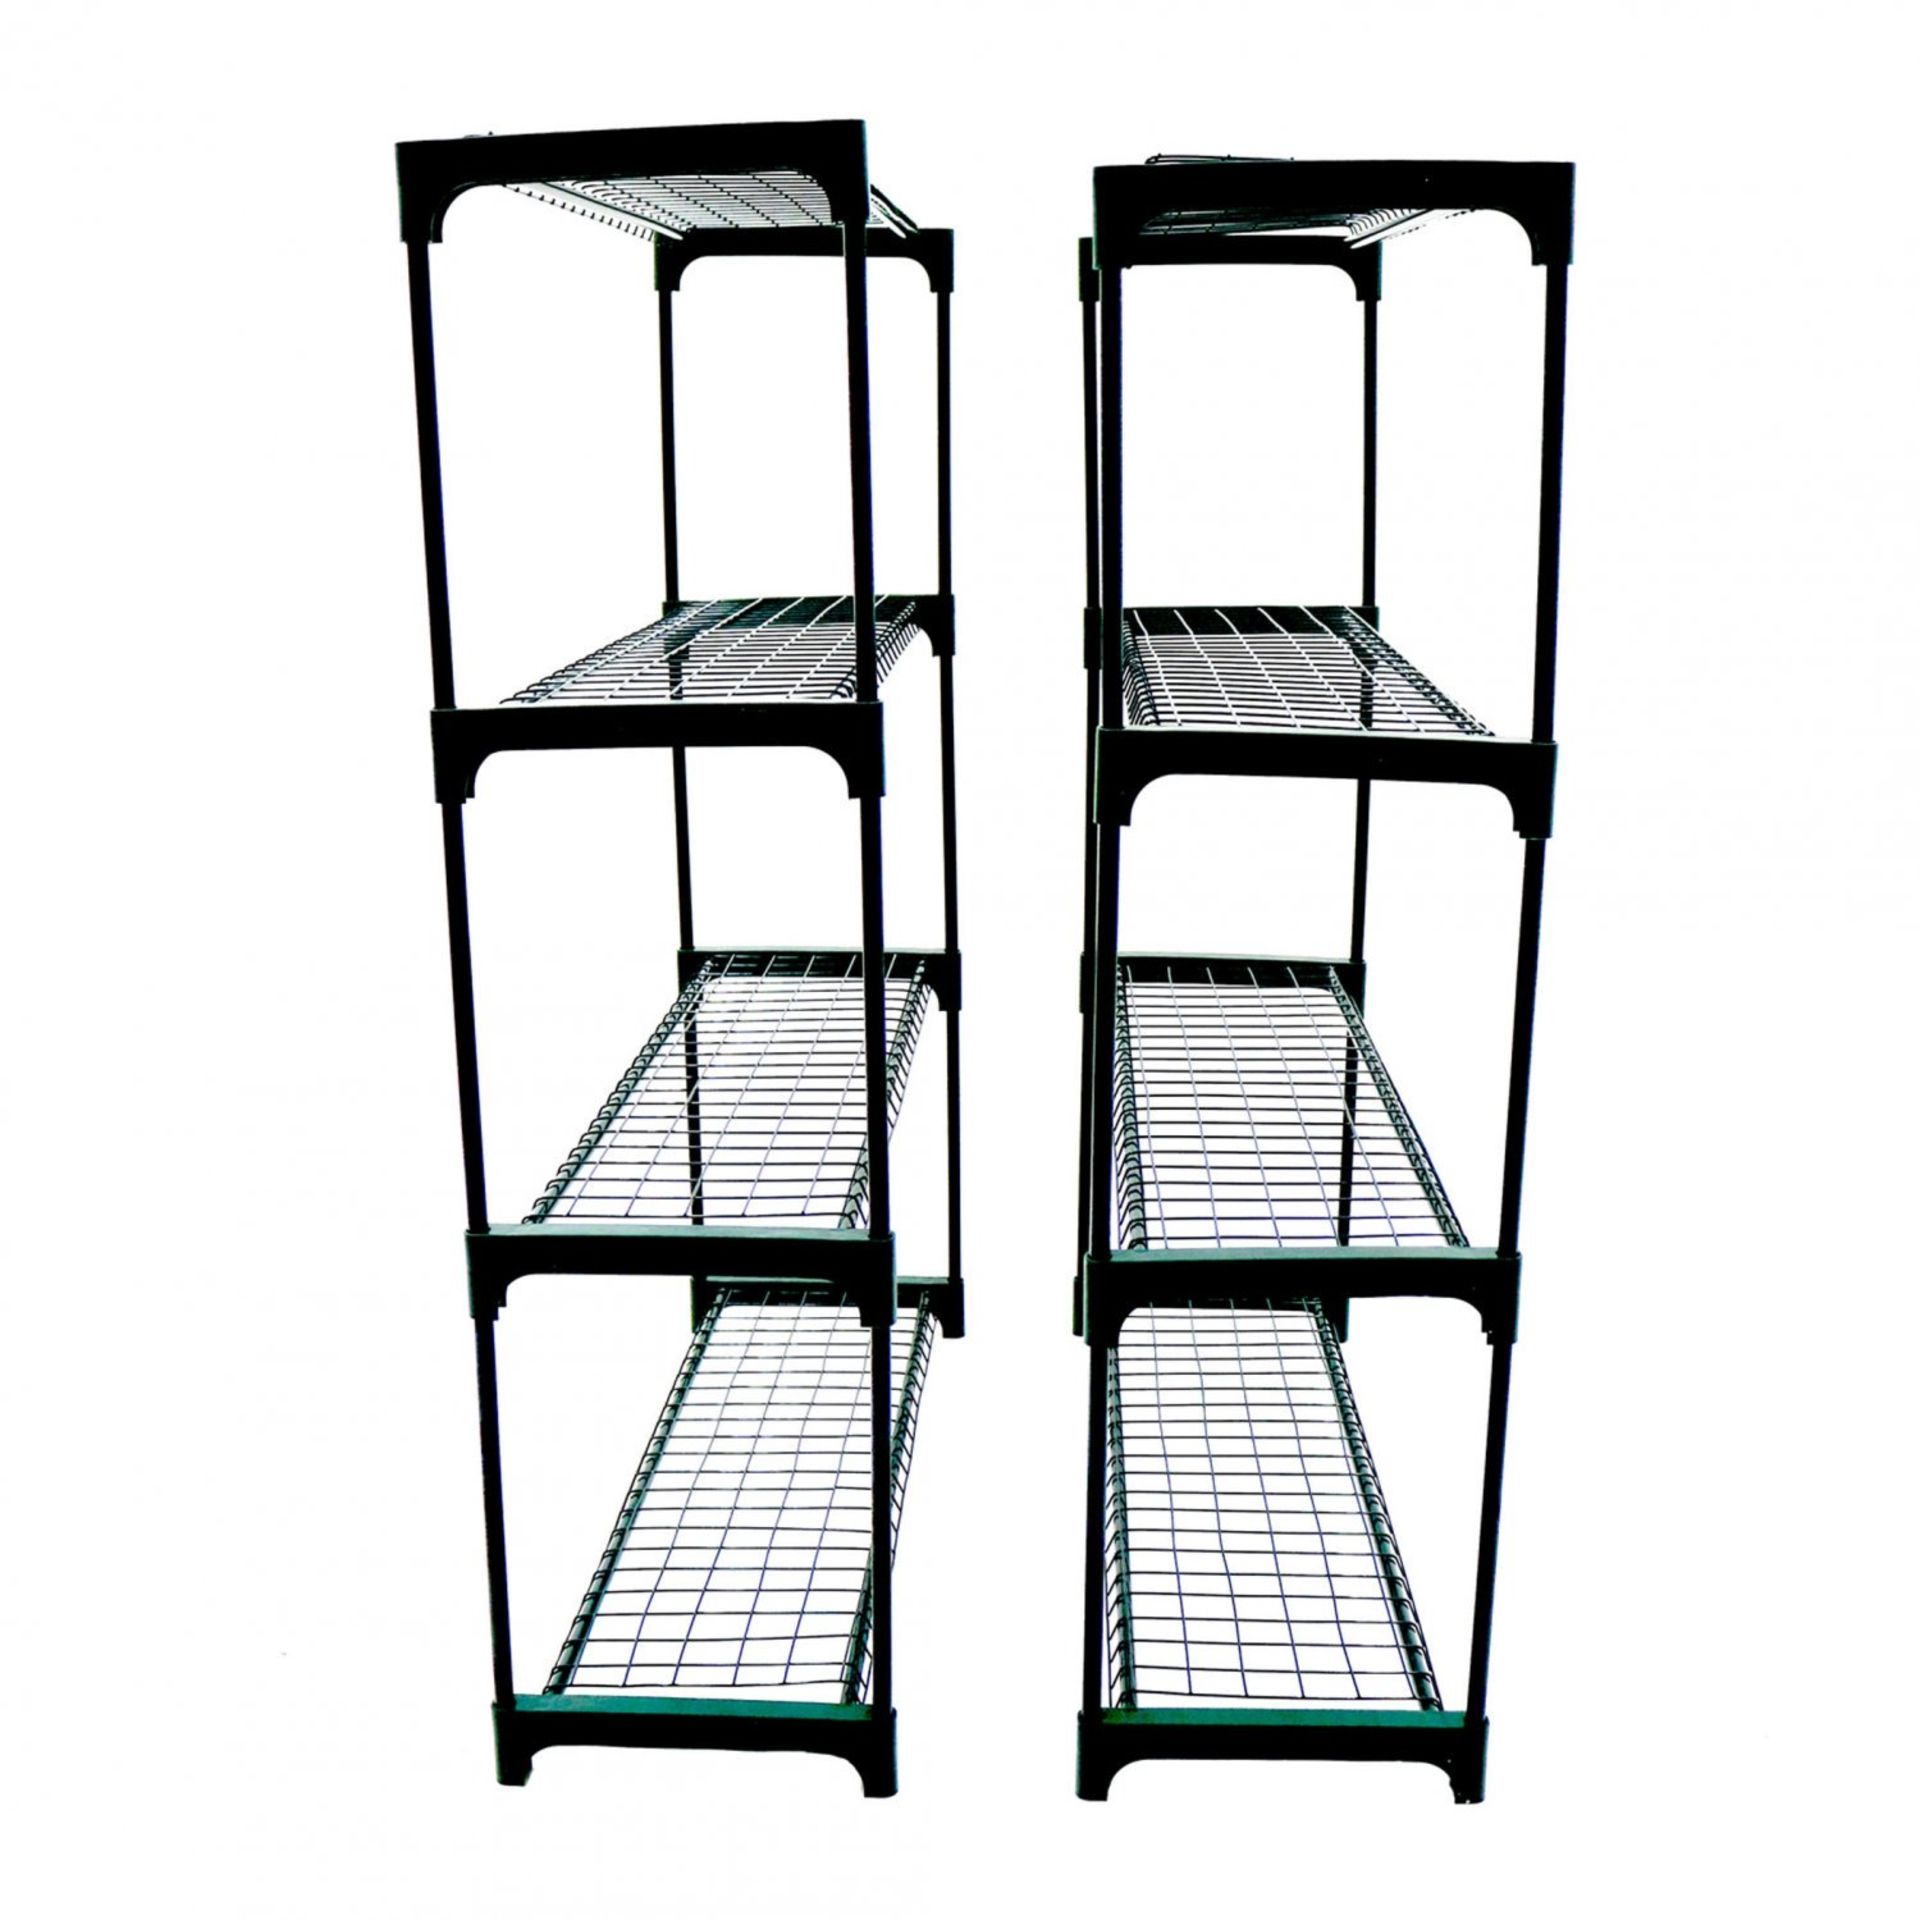 (SK185) Flower Staging (Double Pack) Fantastic value for money, this 4 tier Greenhouse ... - Image 2 of 2